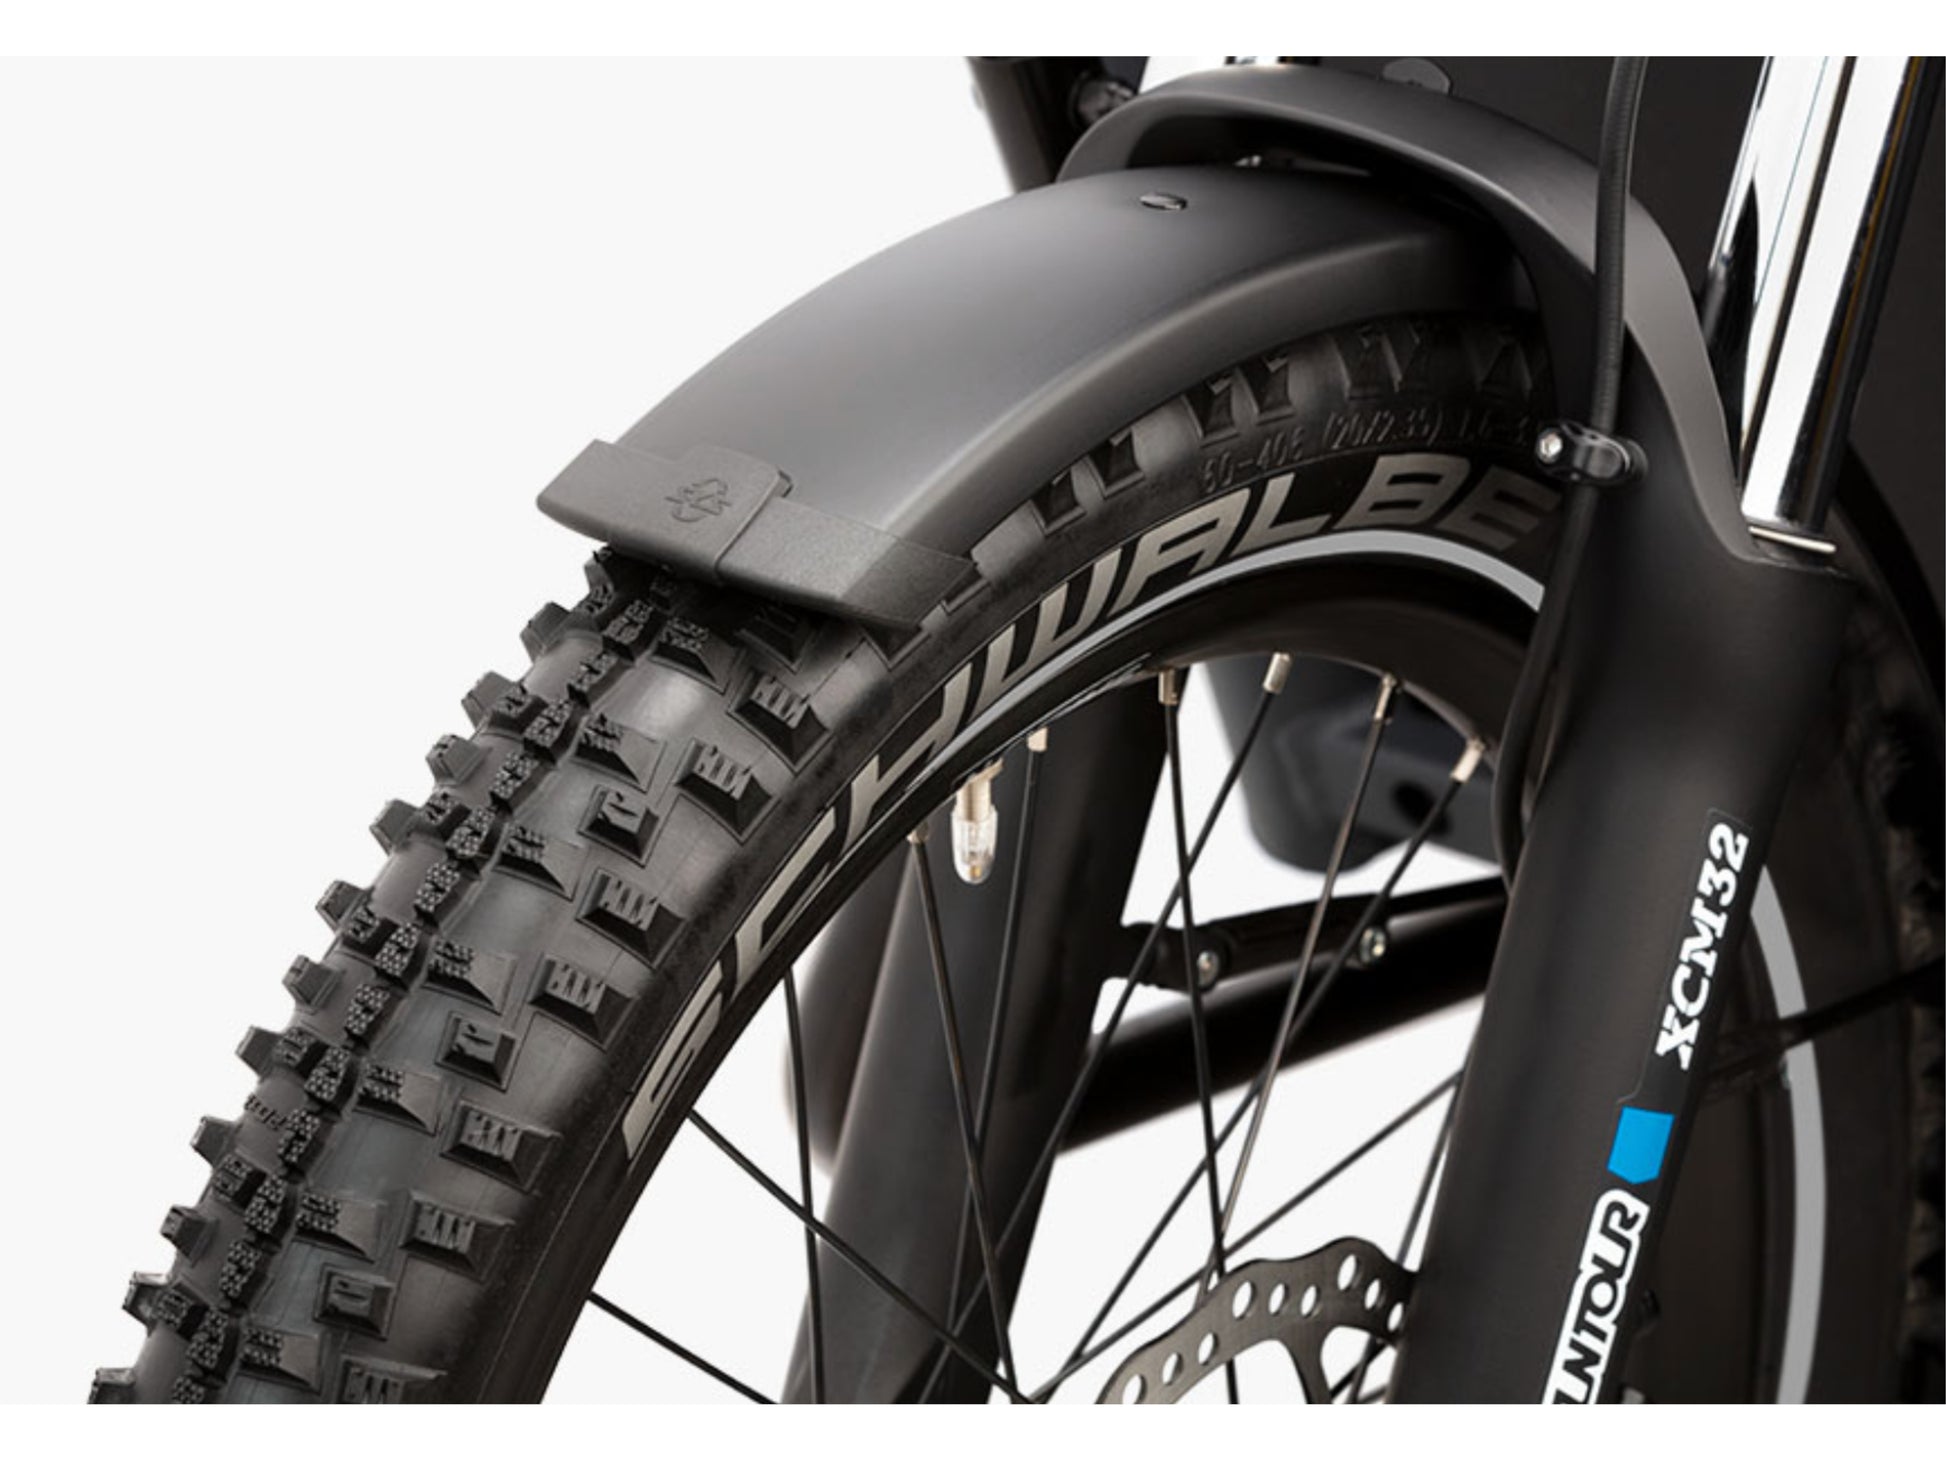 Riese & Muller Packster 70 Vario cargo eMTB hardtail close up gx option